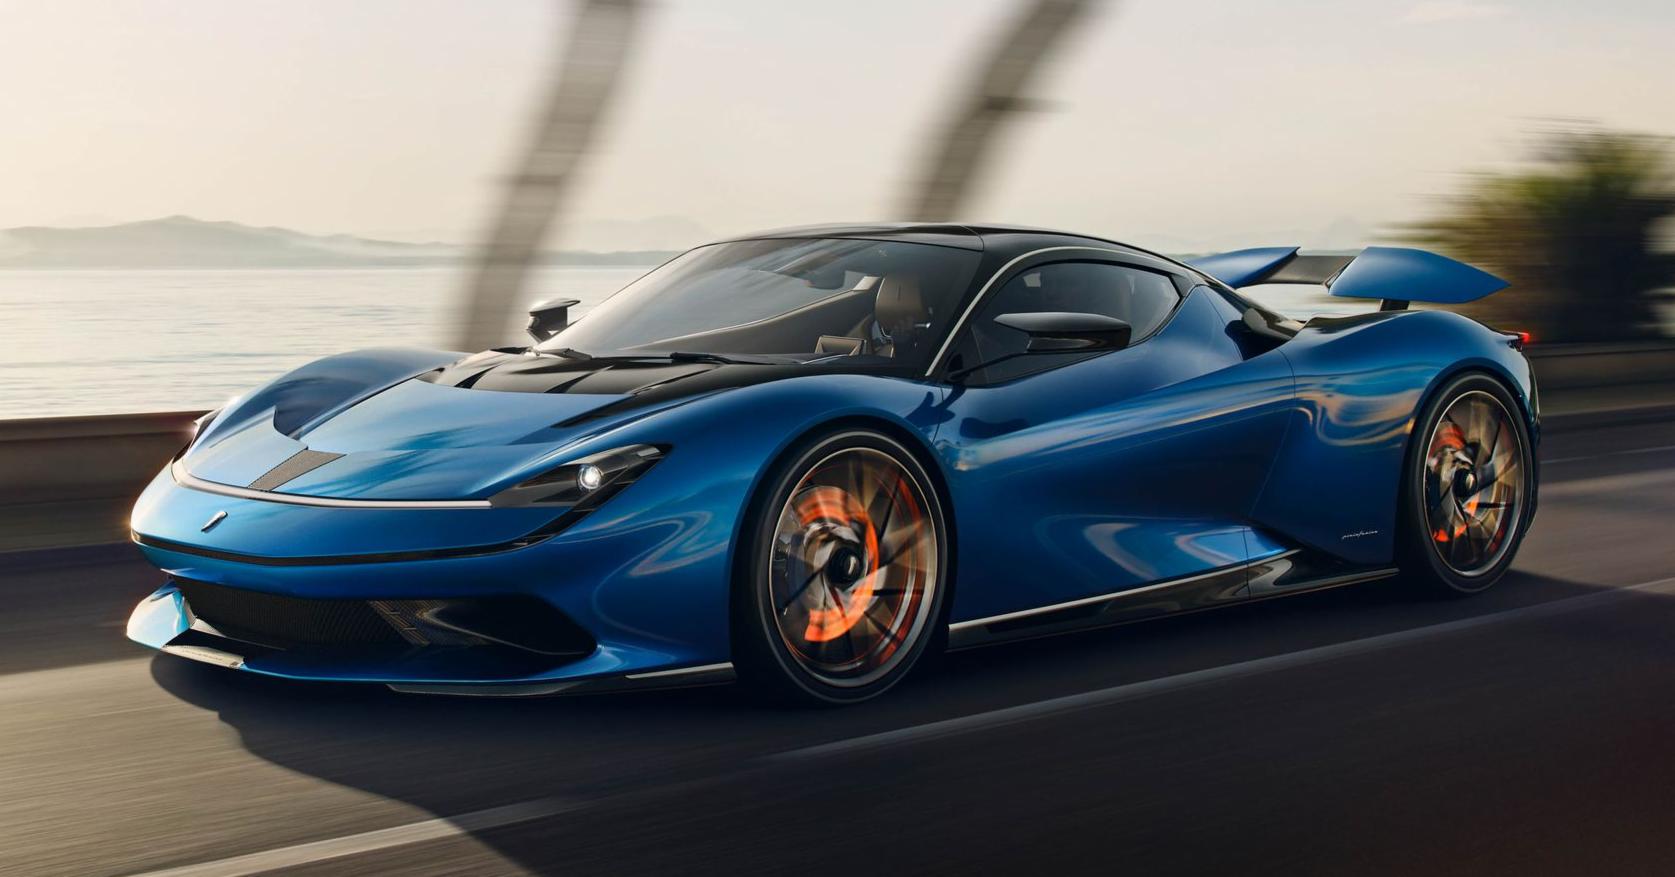 The Electric Pininfarina Battista Is the Most Powerful Street-Legal Car  Ever Made - Maxim